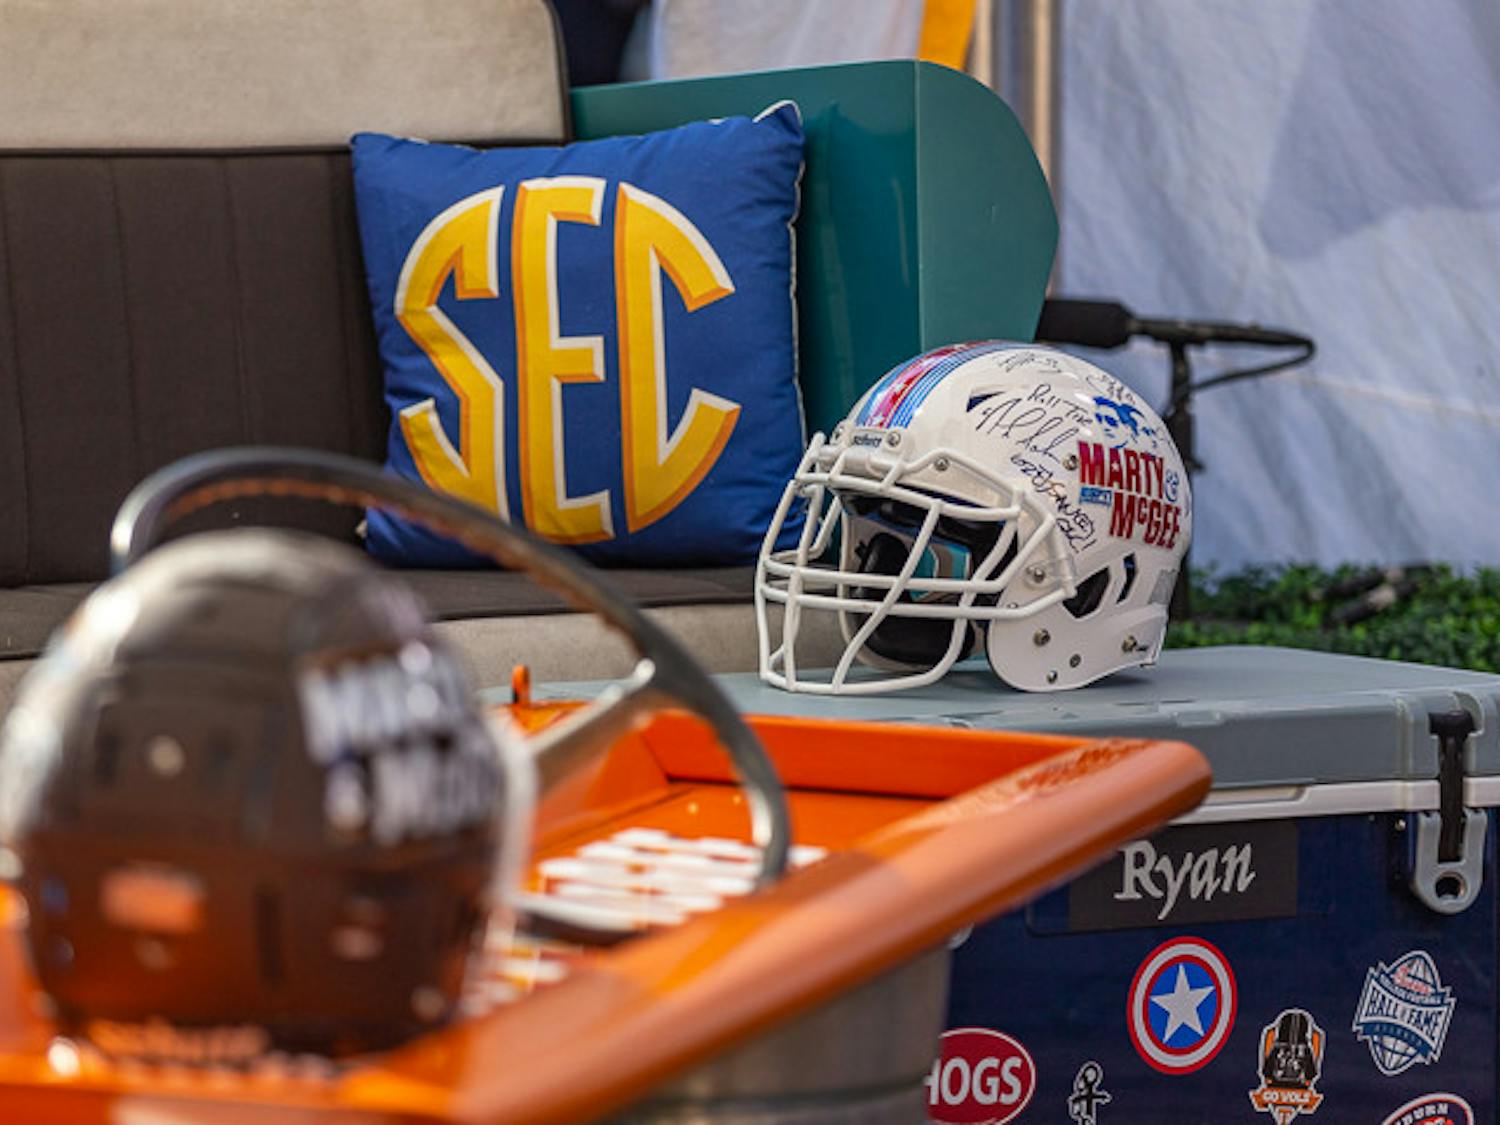 Signed helmets from coaches and platers sit in the Marty &amp; McGee tent on Nov. 19, 2022. The pregame show travels each week to SEC campuses to discuss upcoming games and interview players, coaches, and staff.